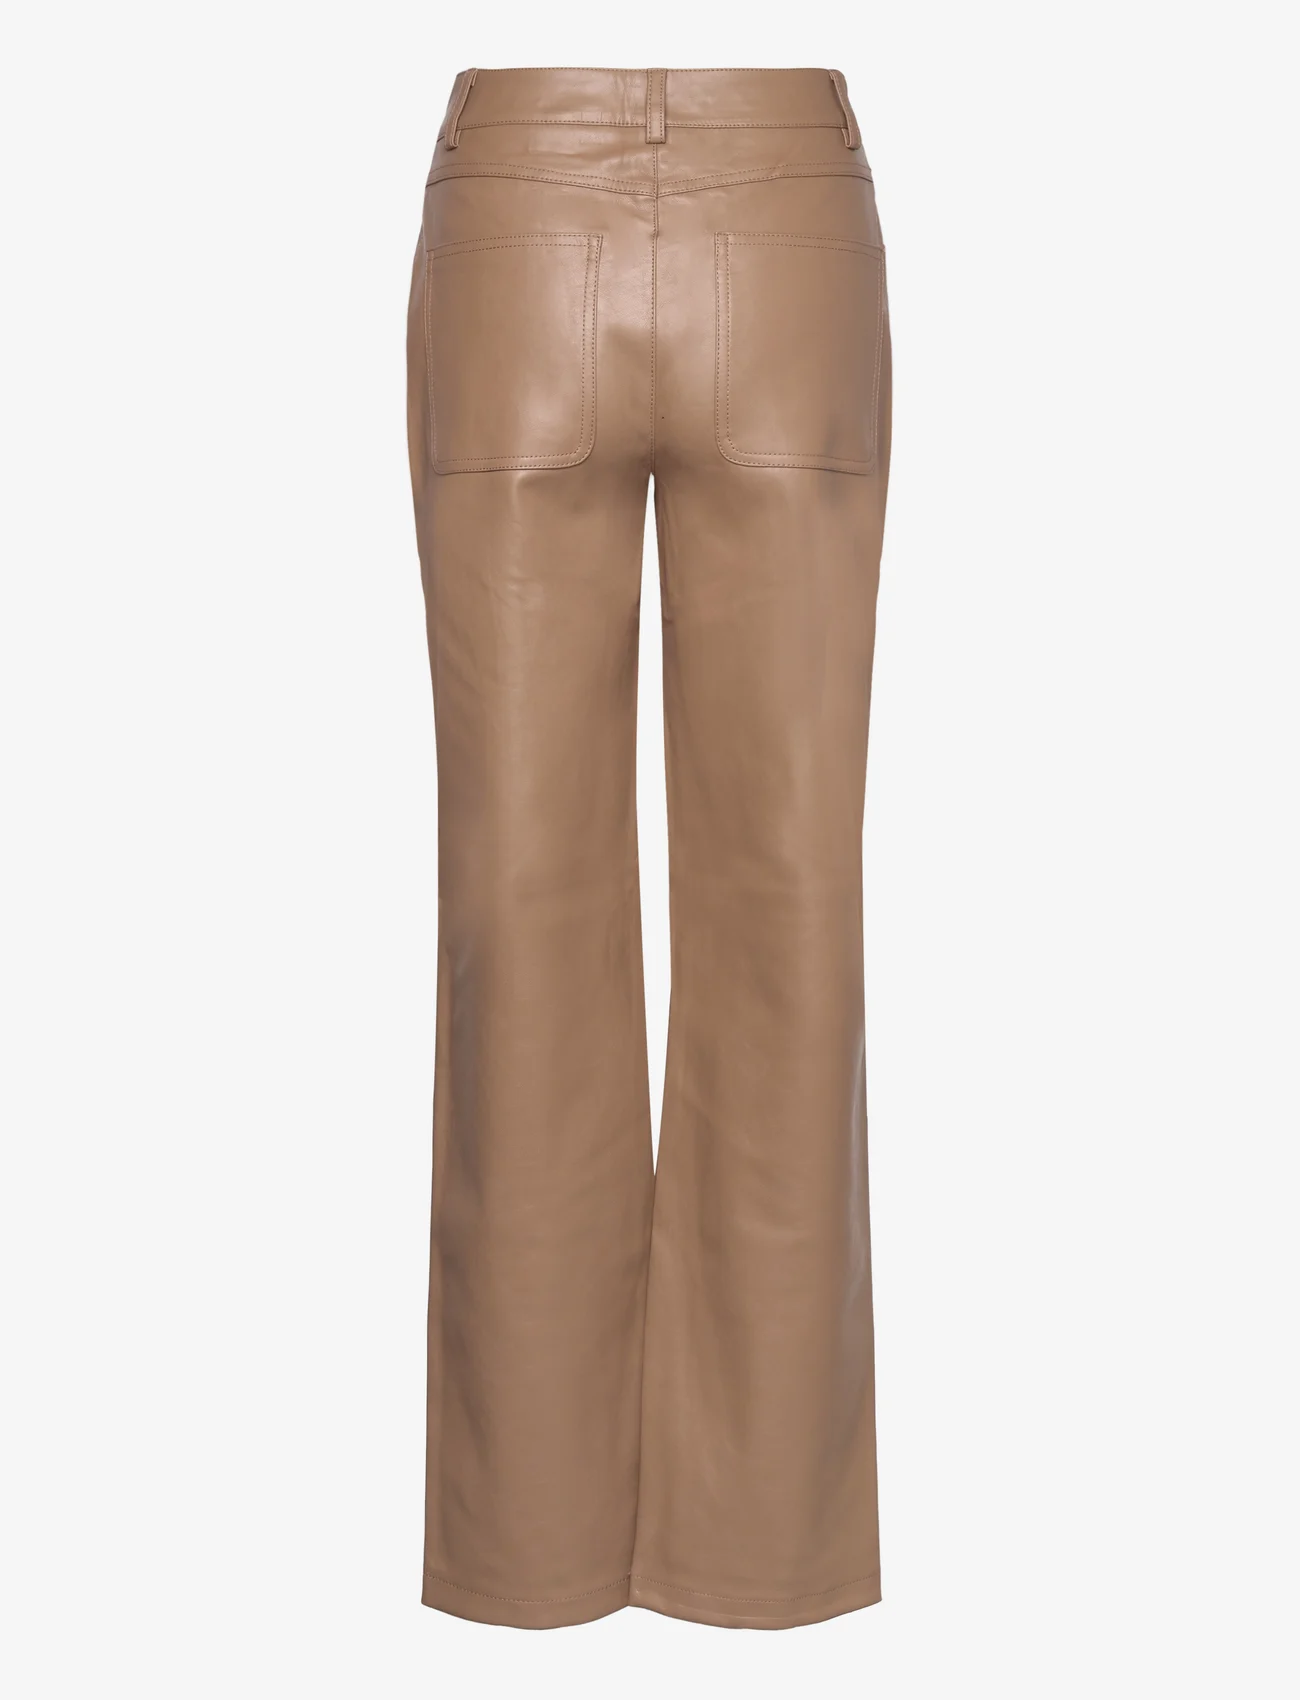 Sofie Schnoor - Trousers - party wear at outlet prices - dusty brown - 1